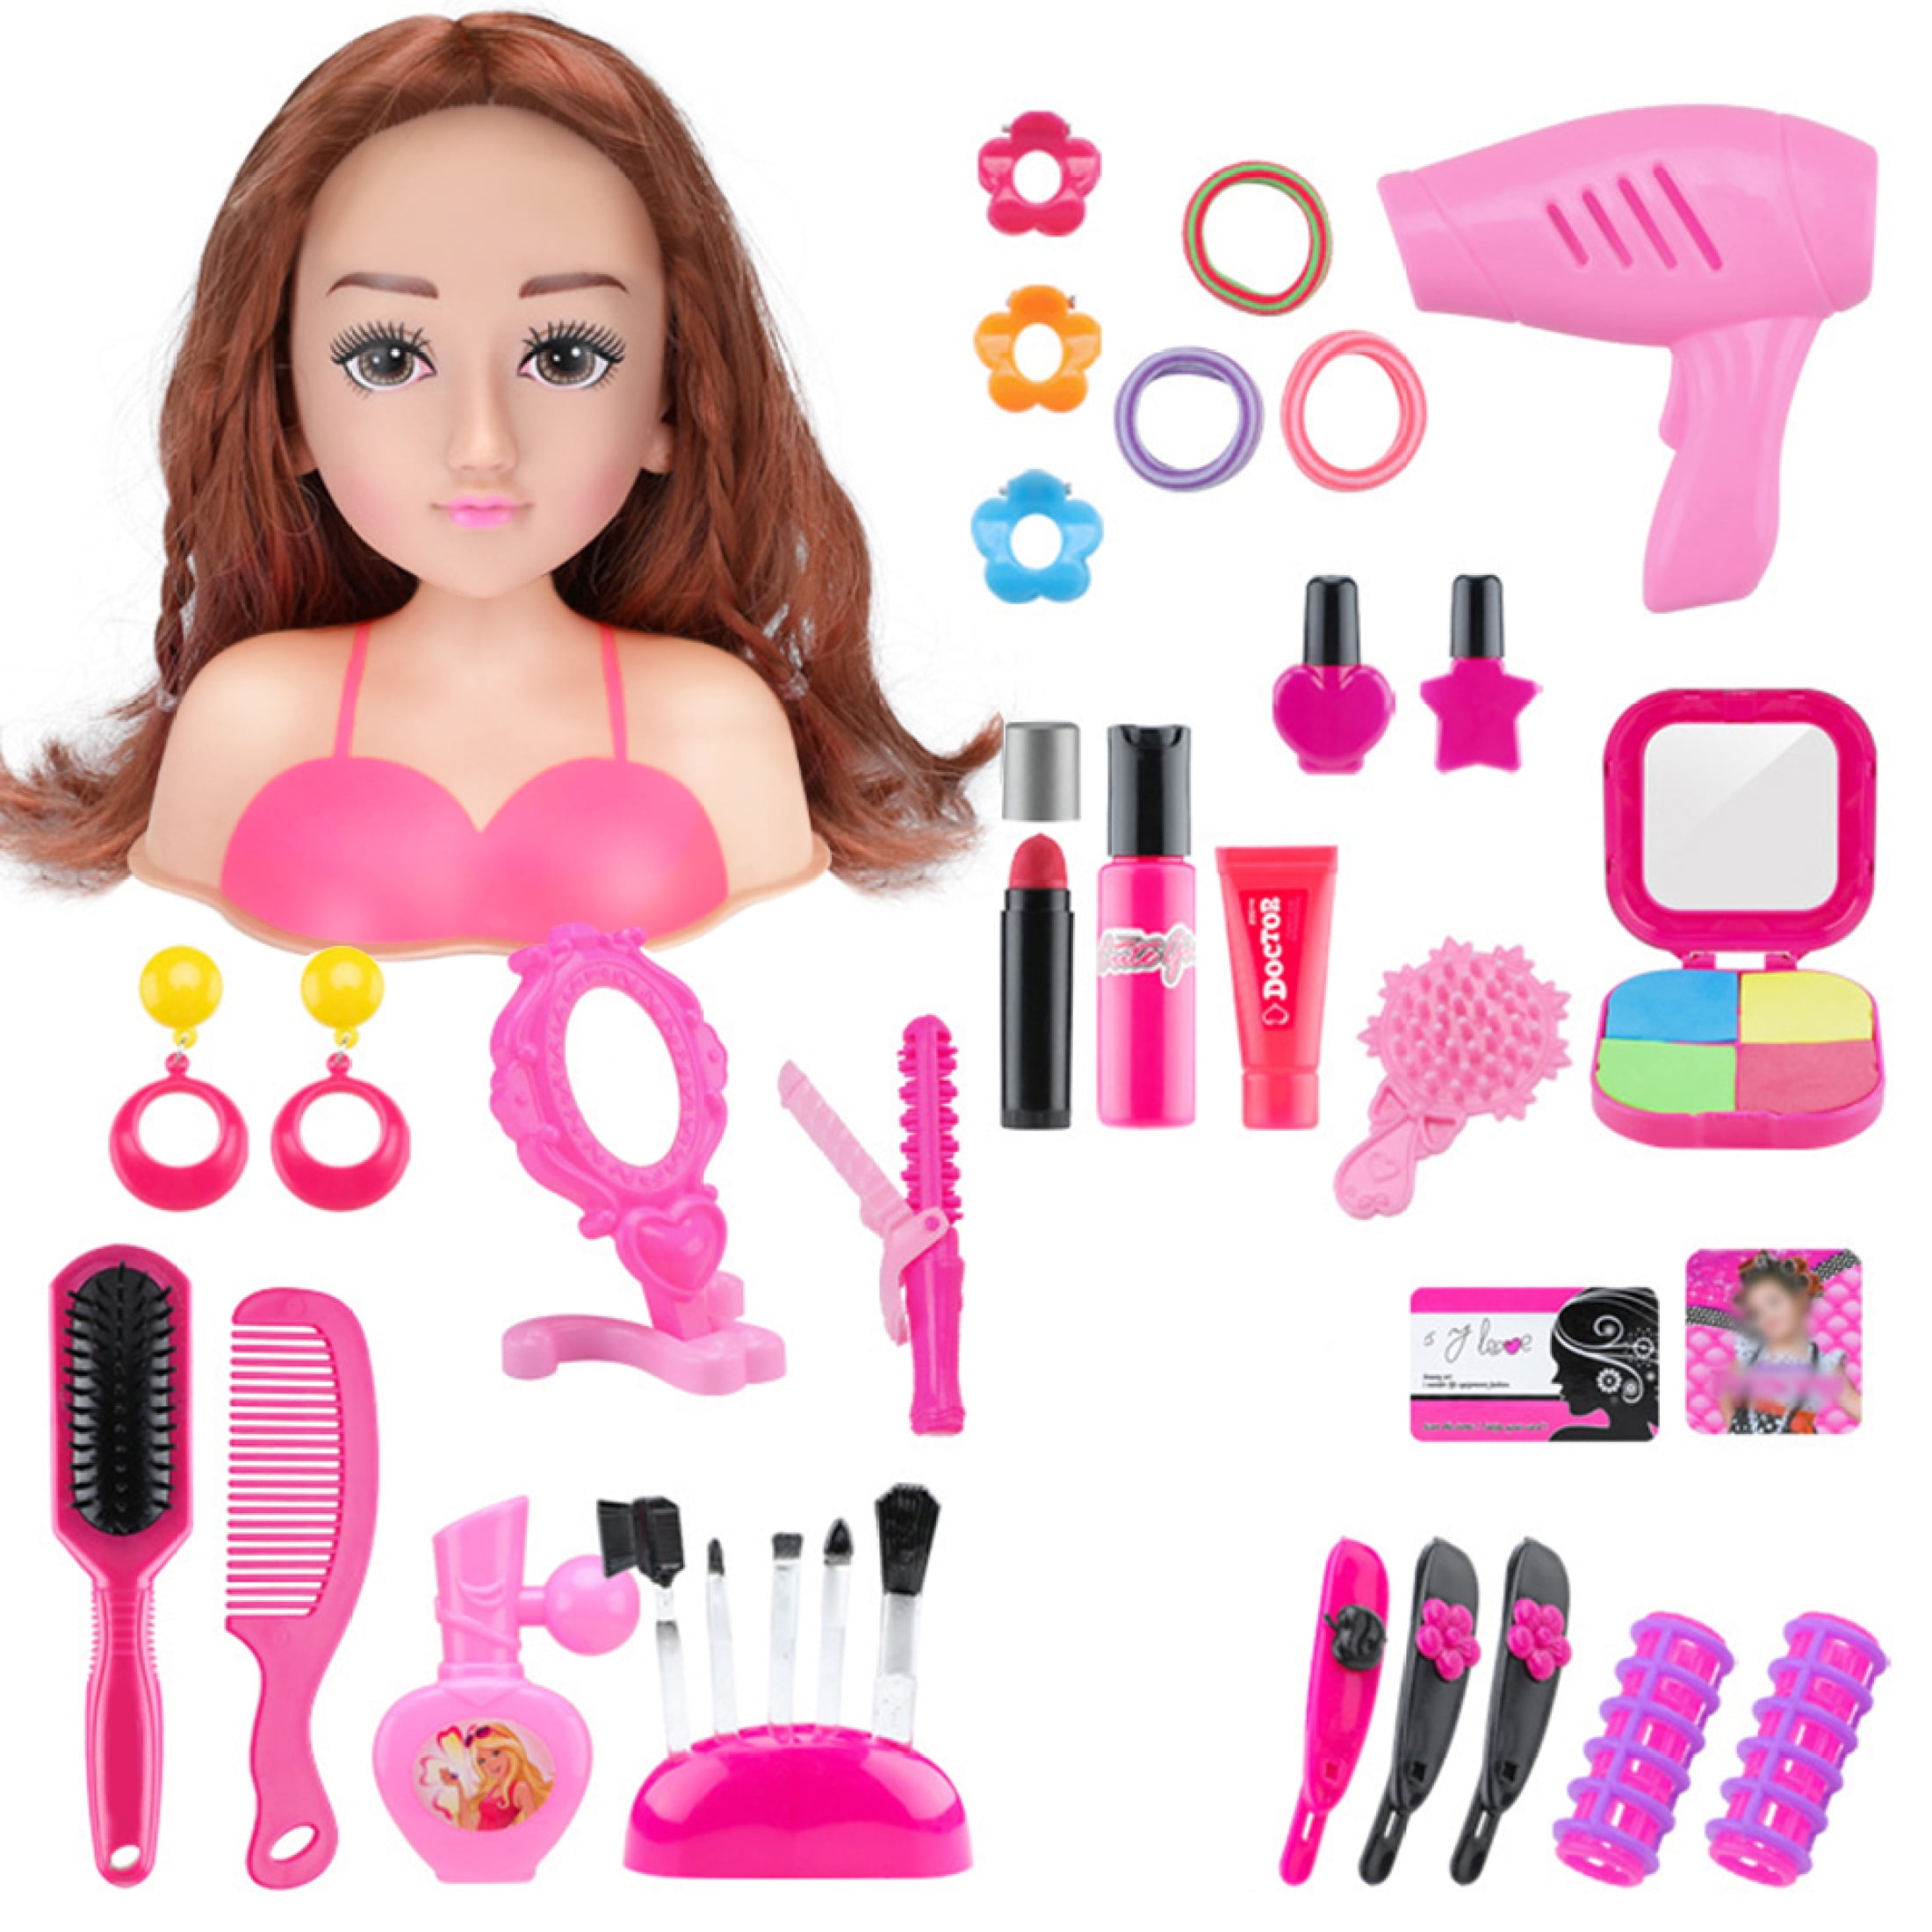 RUBBER FEMALE HEADS-POLLY PRODUCTS #160 With Makeup